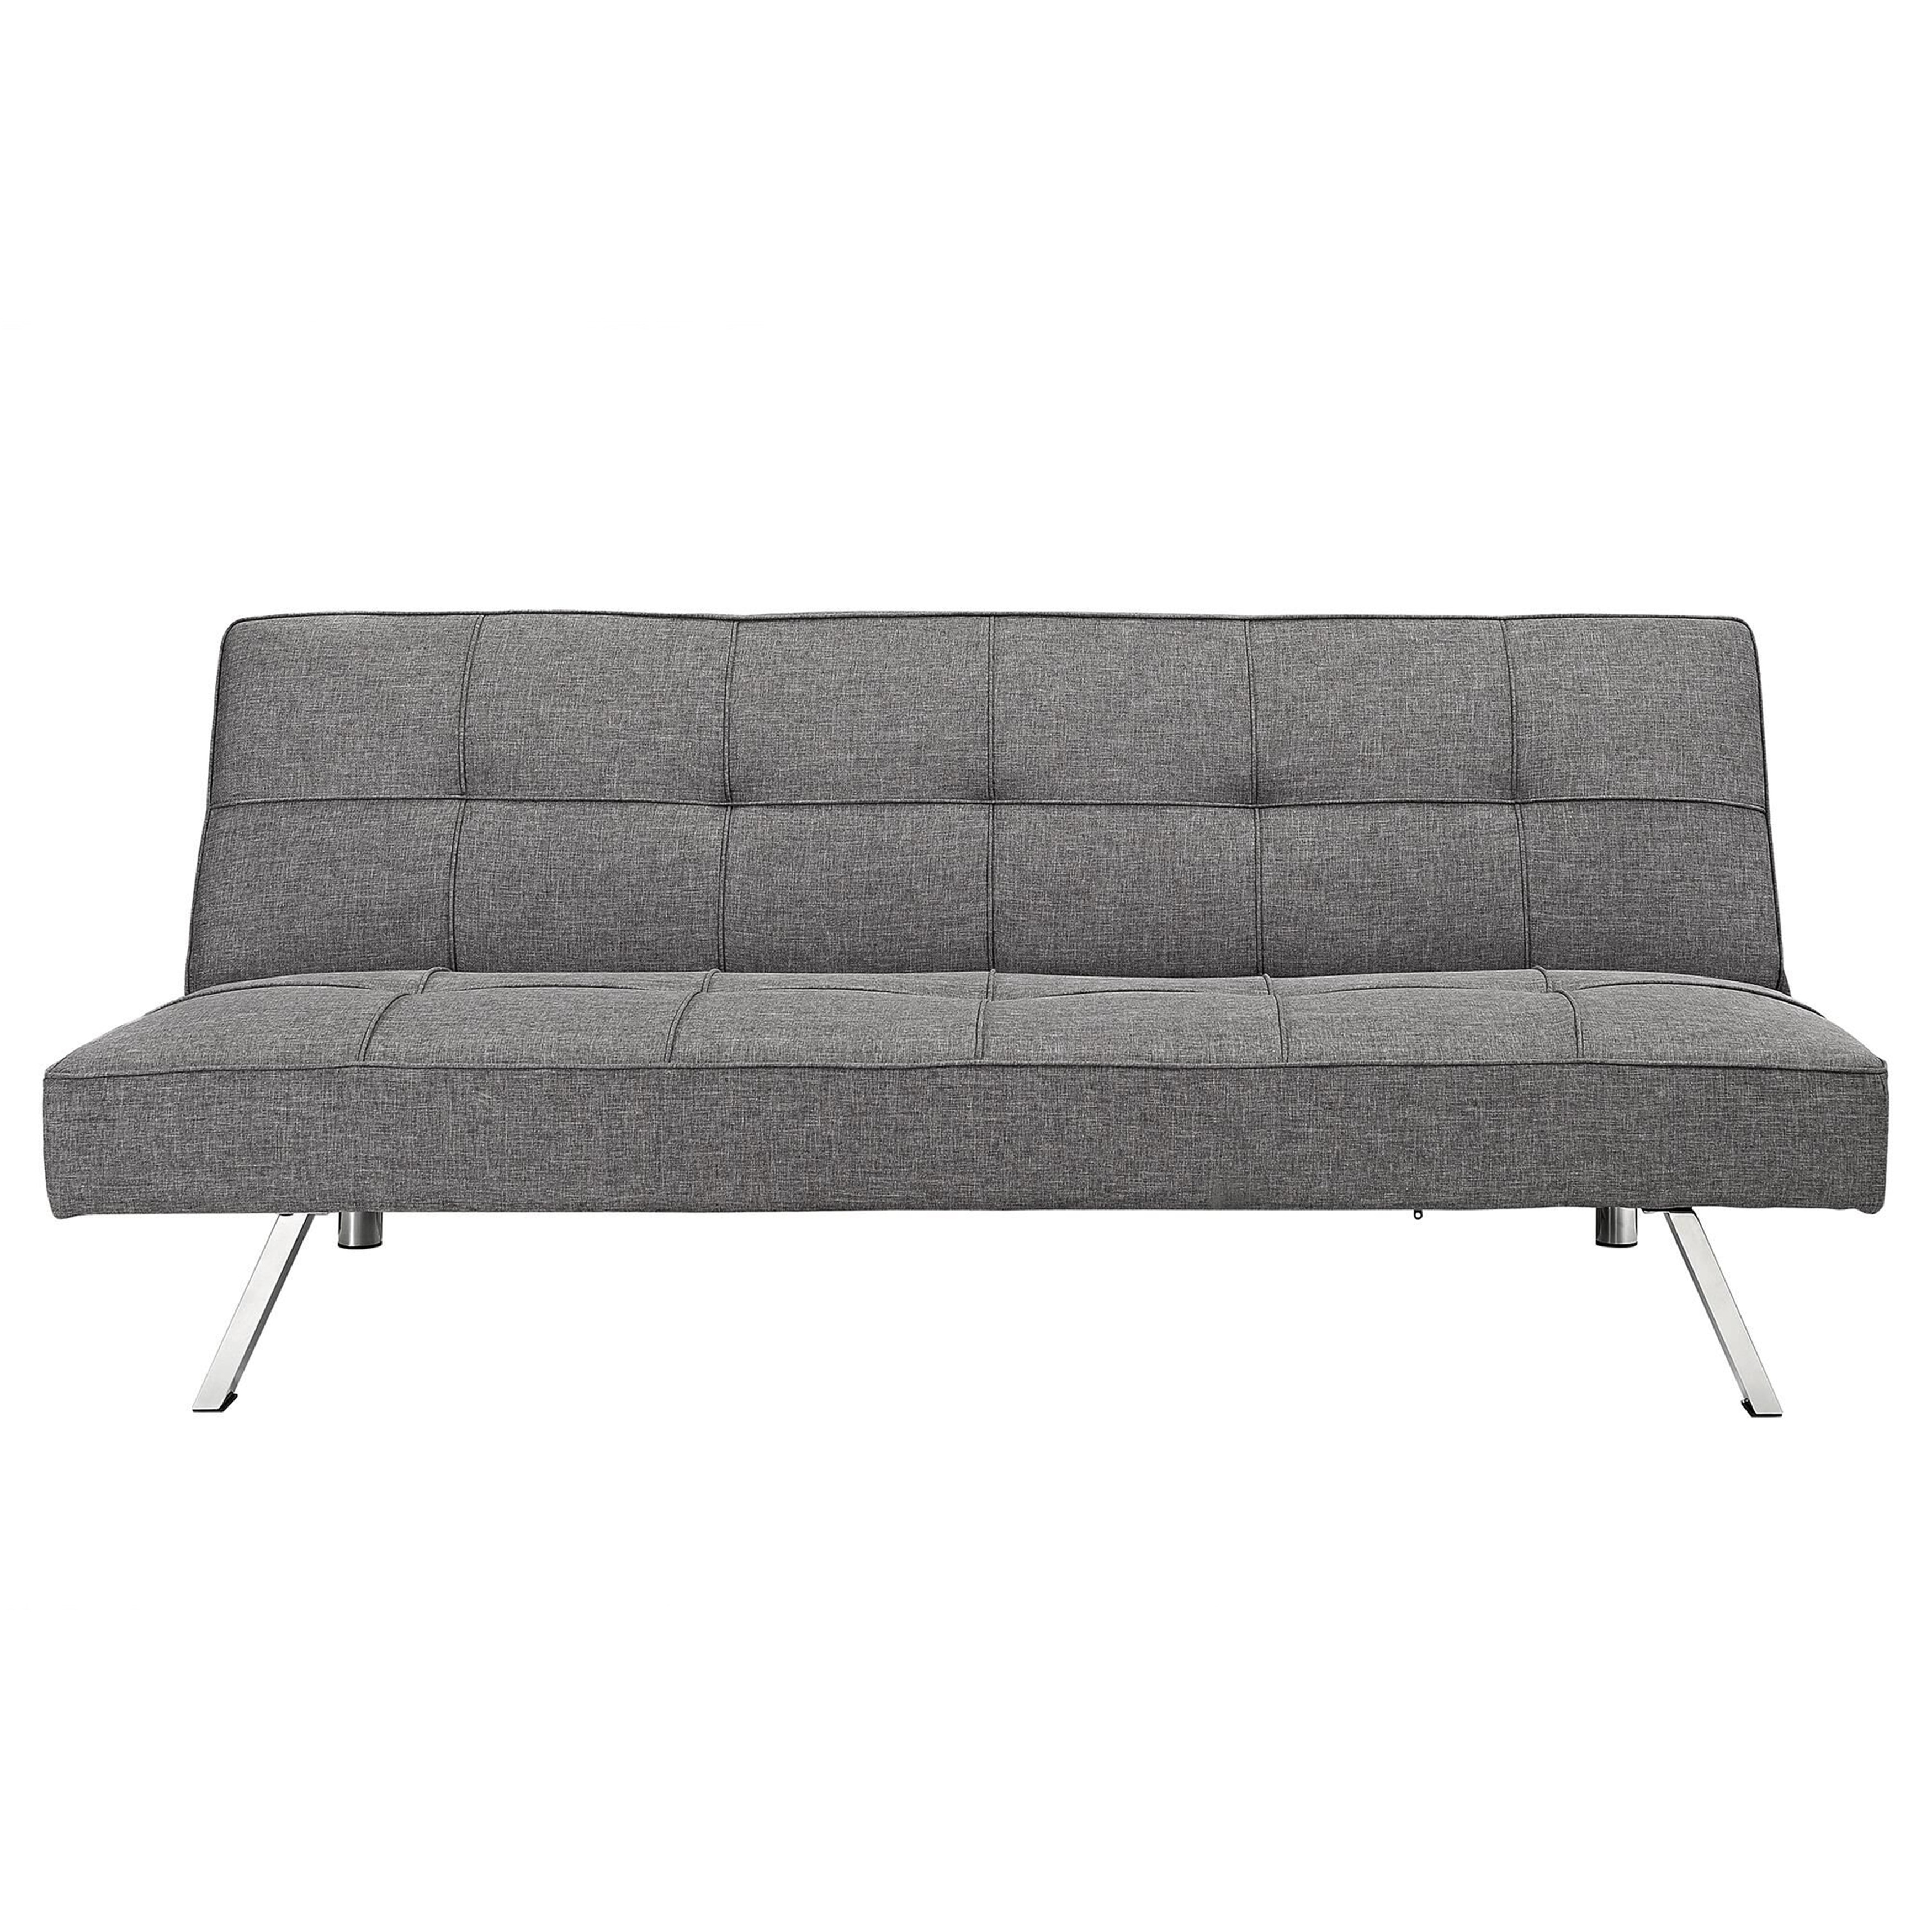 GZMR sofa bed with metal frame and stainless leg